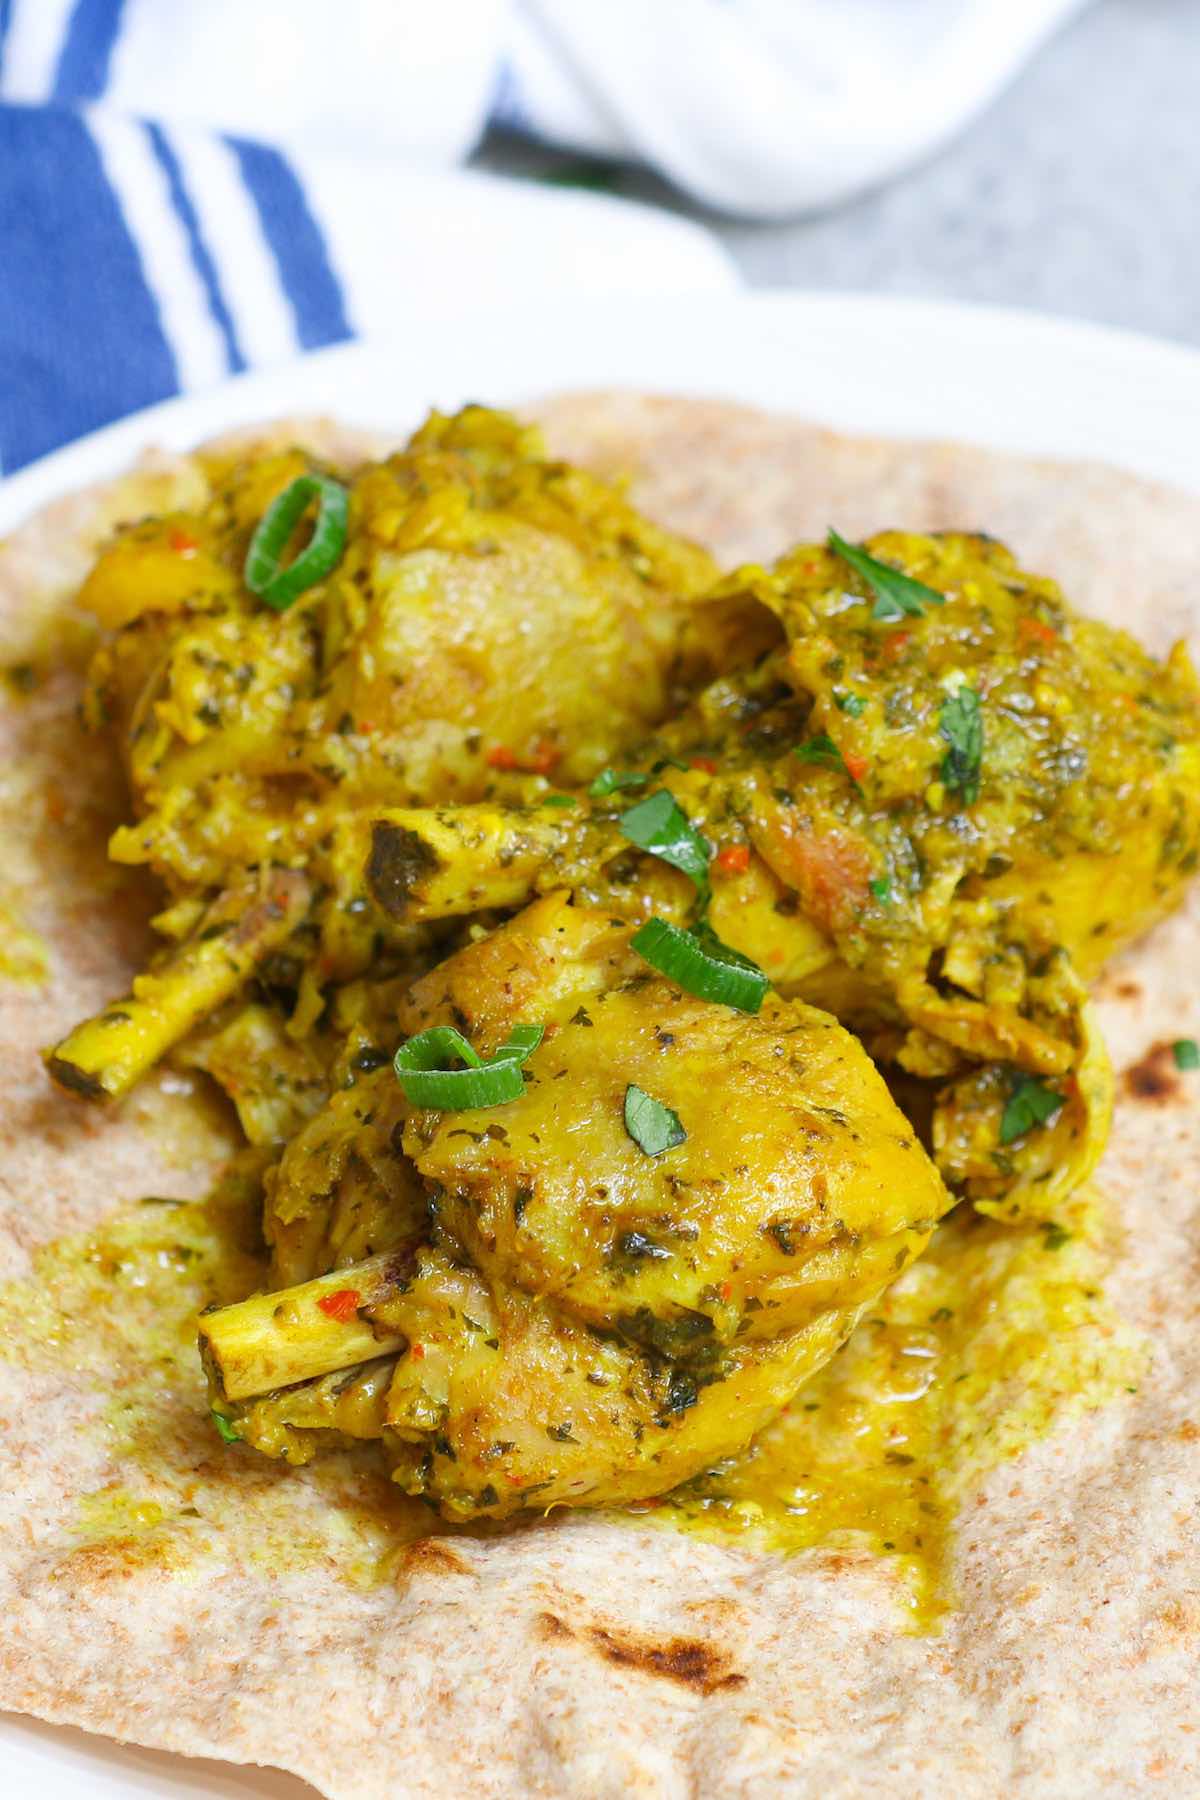 Curry chicken pieces on roti